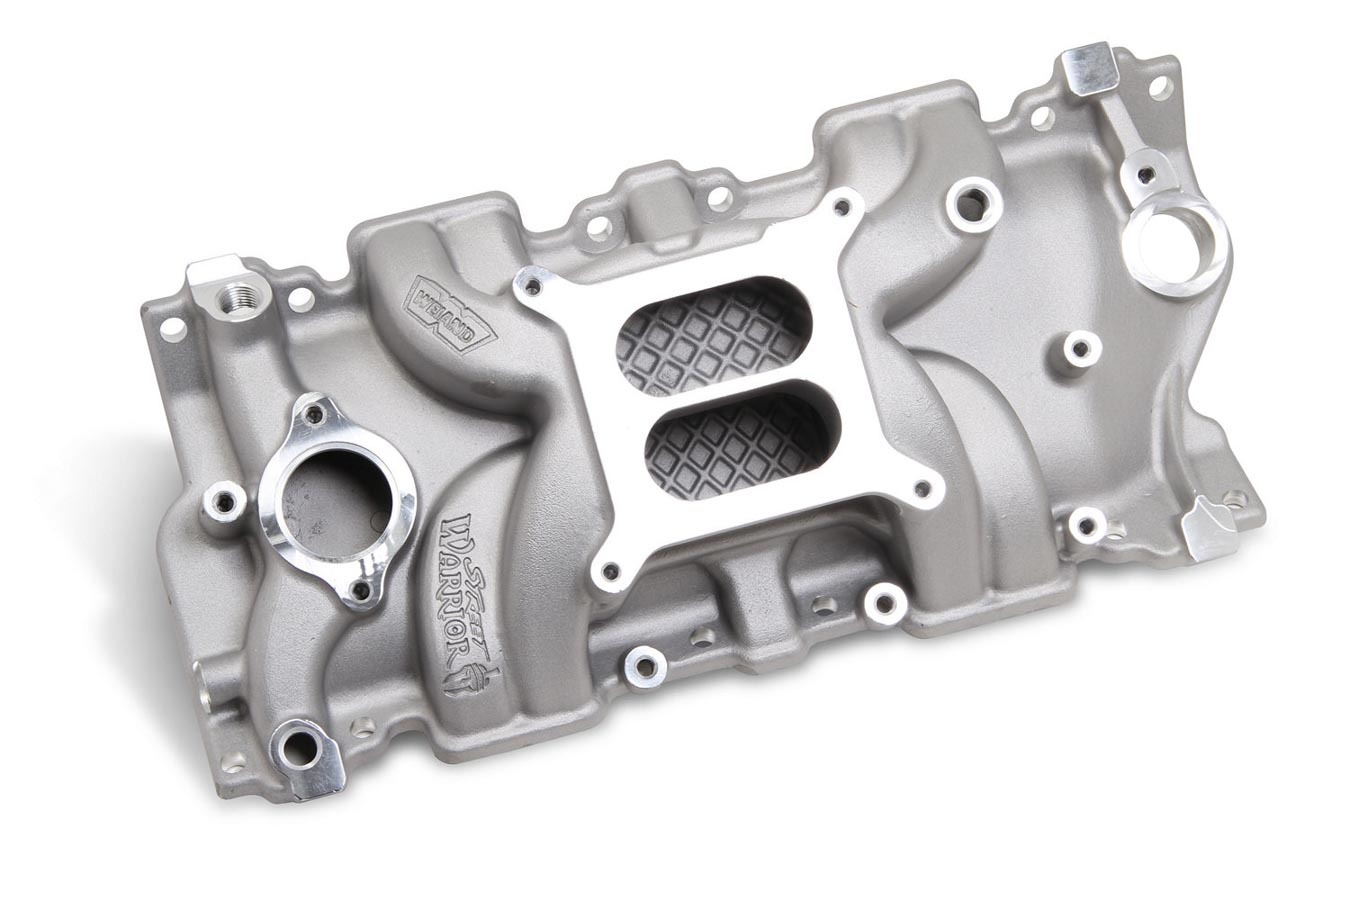 Weiand 8120 Intake Manifold, Street Warrior, Square Bore, Dual Plane, Aluminum, Natural, Small Block Chevy, Each